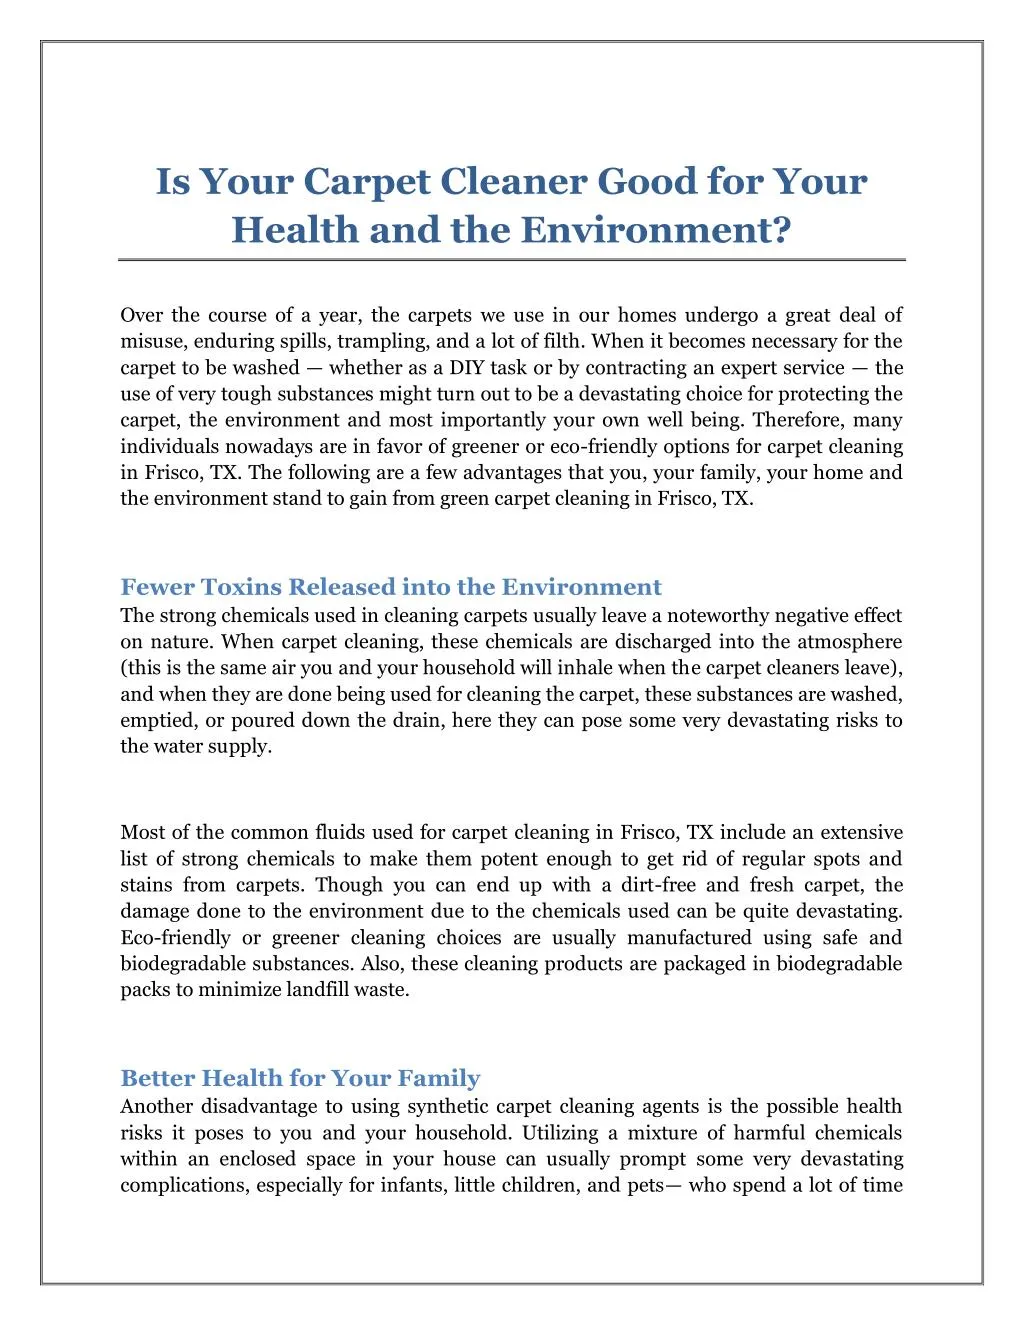 is your carpet cleaner good for your health